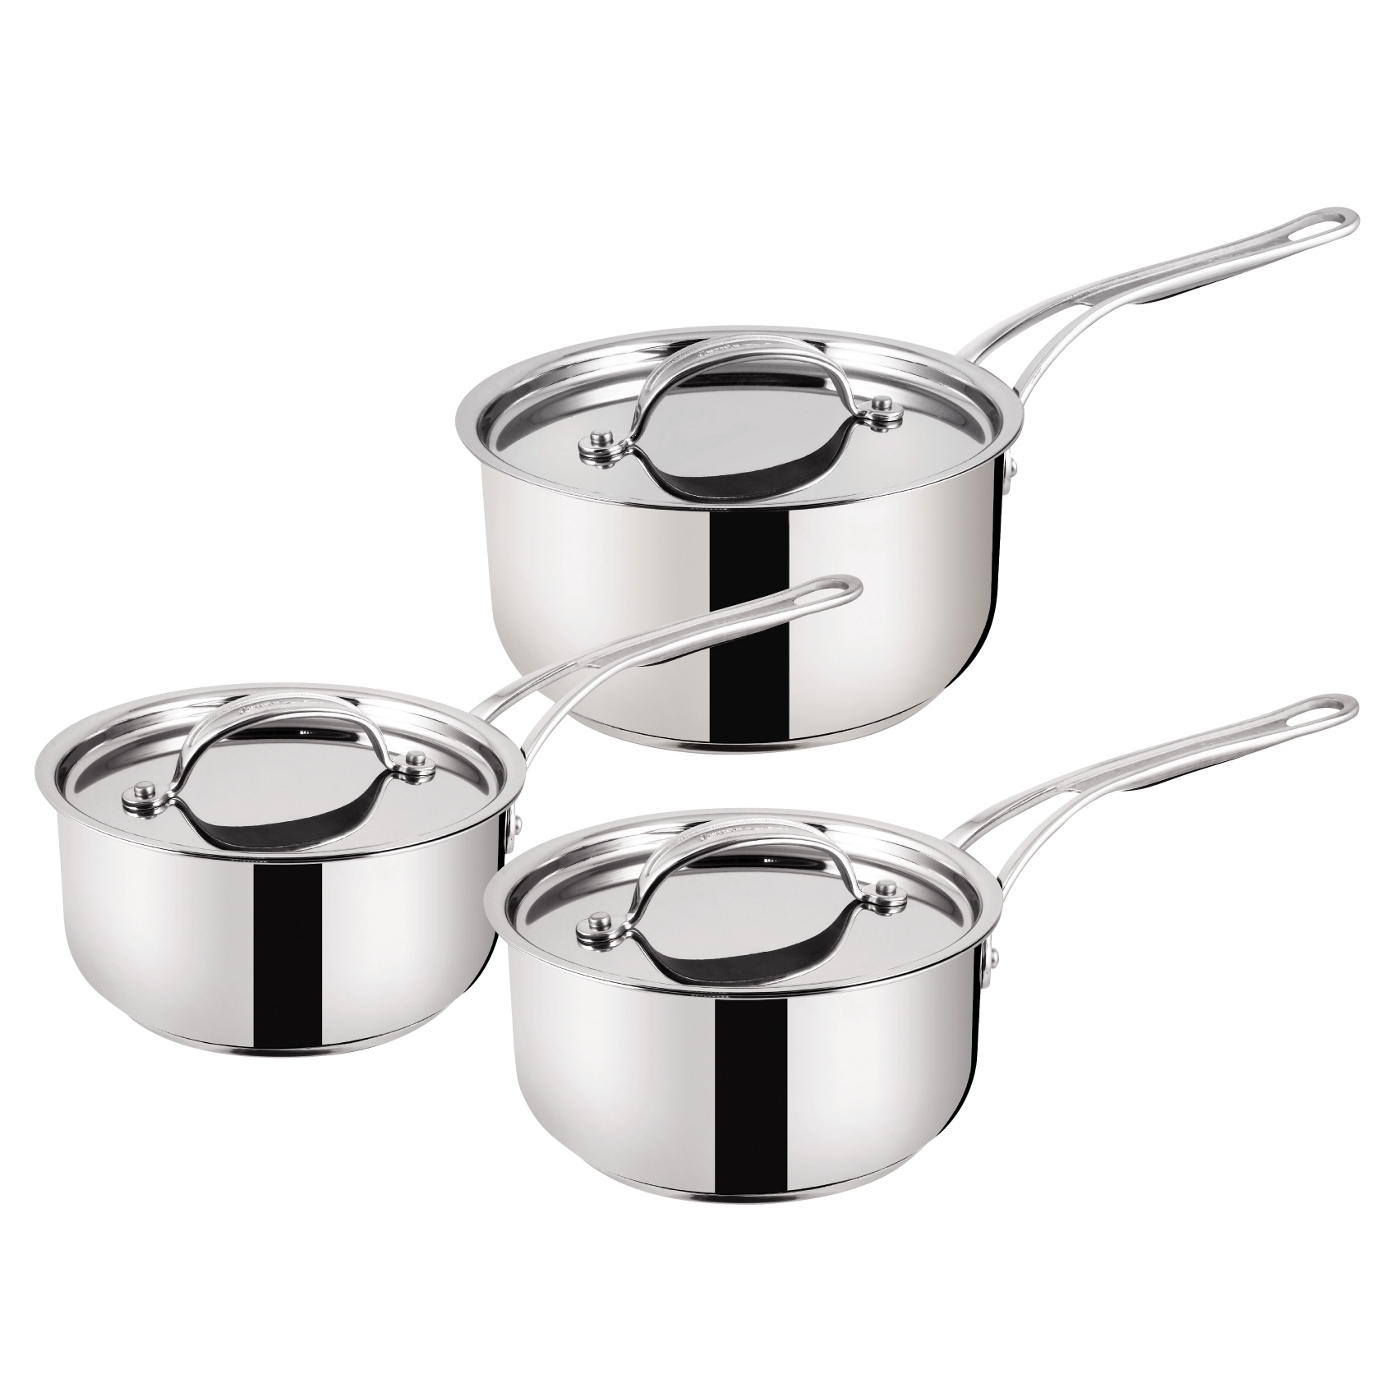 Jamie Oliver By Tefal Stainless Steel professional series 3 piece saucepan set 16/18/20cm